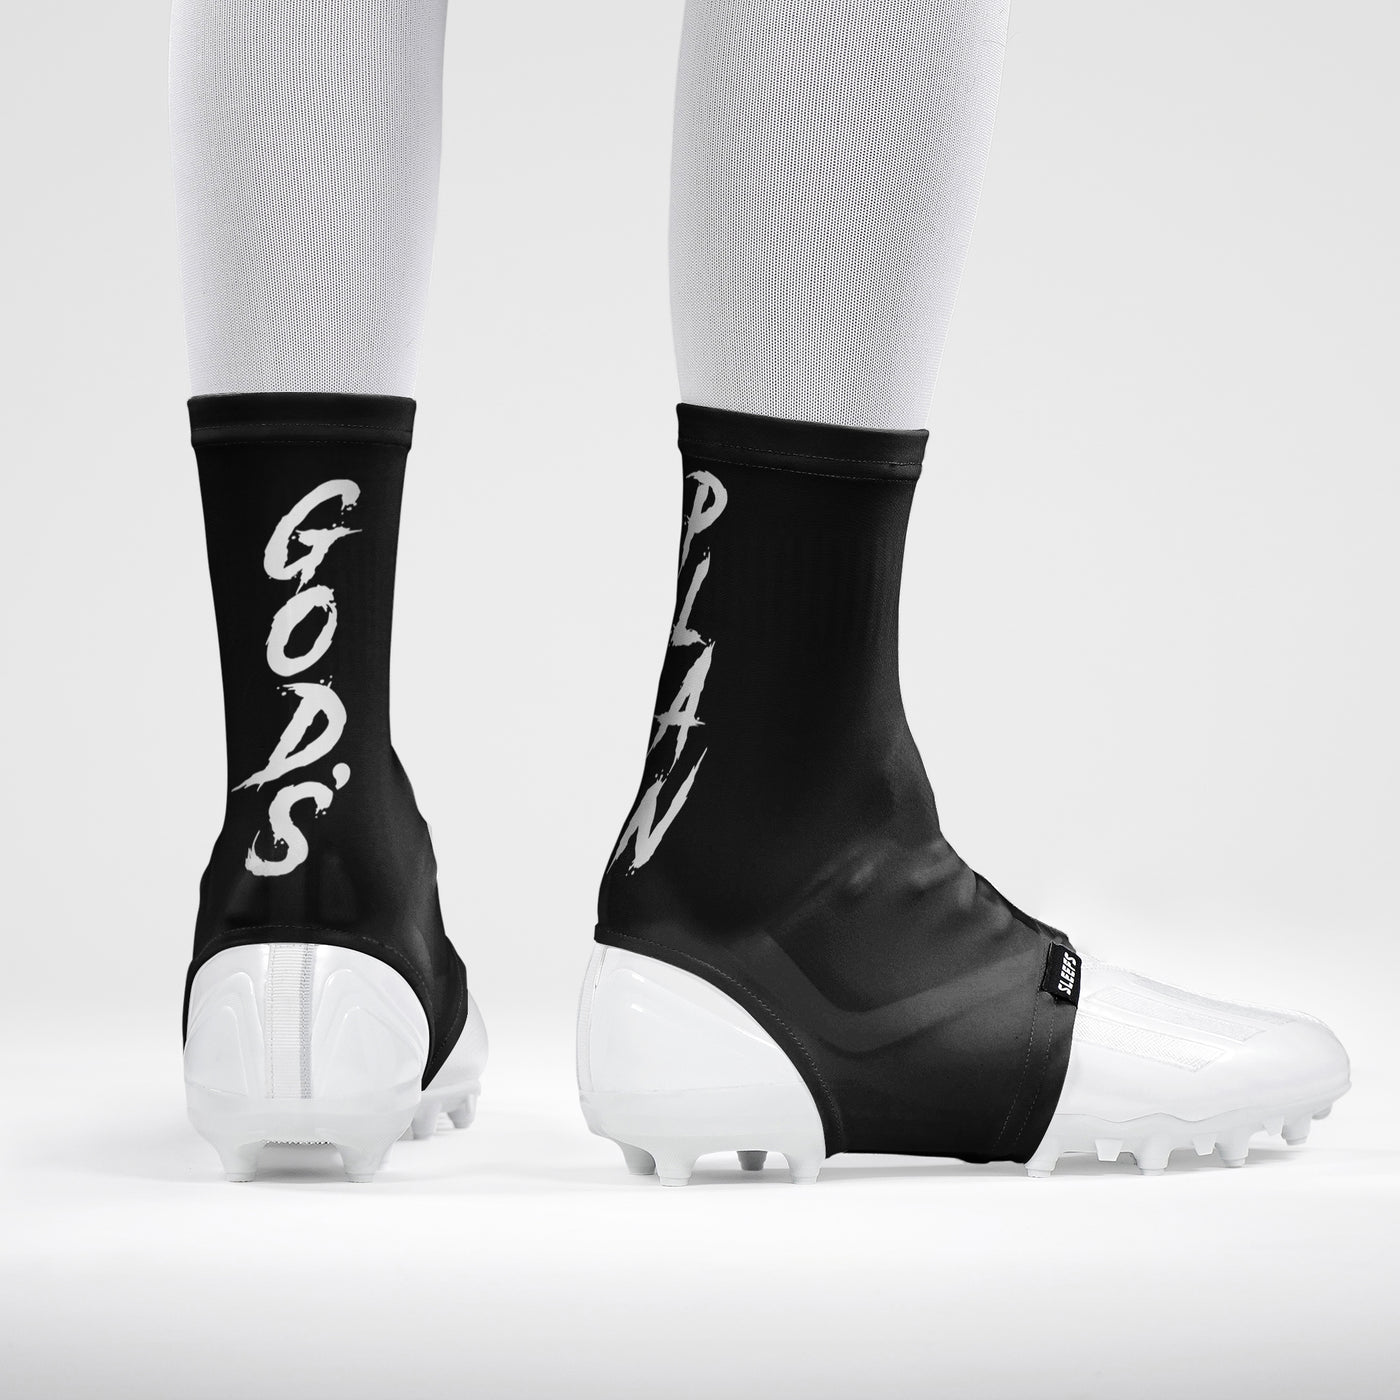 God's Plan 1x1 Black Spats / Cleat Covers